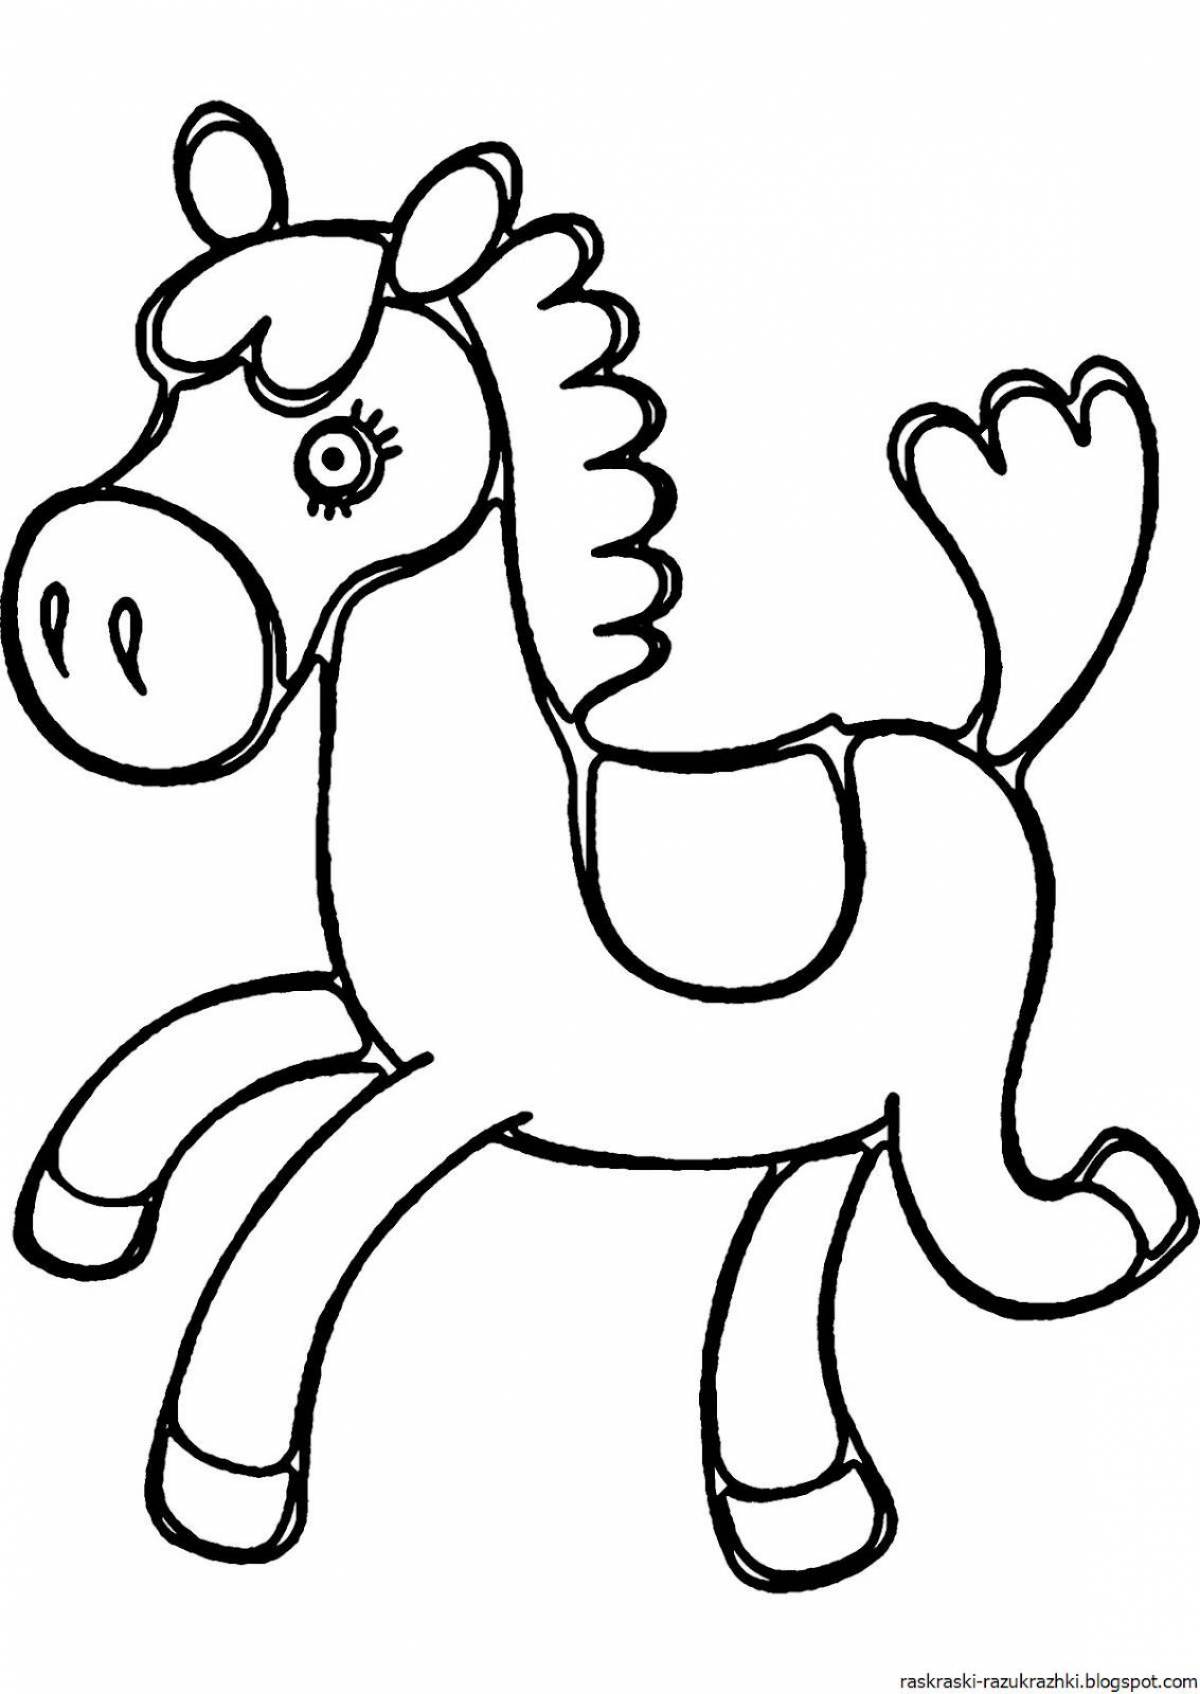 Fun horse coloring book for 3-4 year olds